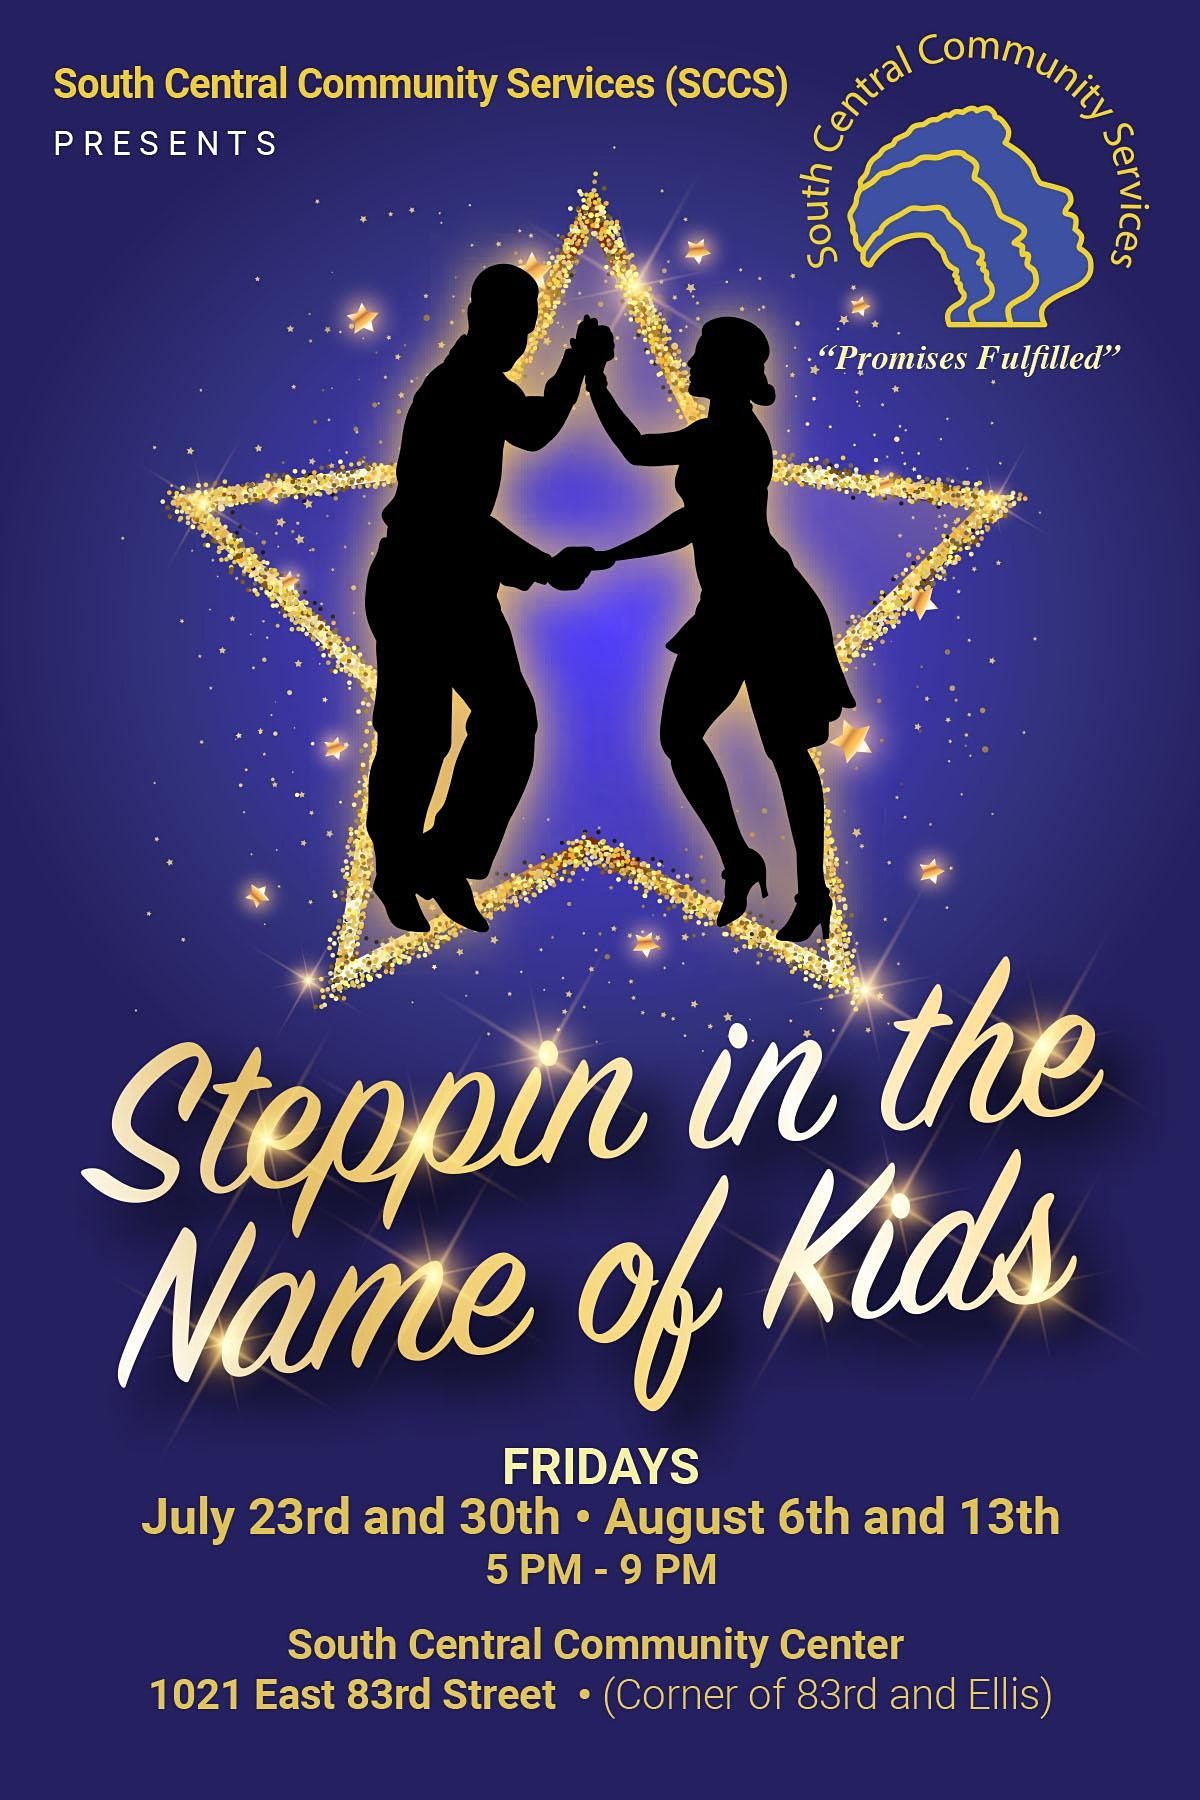 South Central Community Services "Steppin in the Name of Kids"